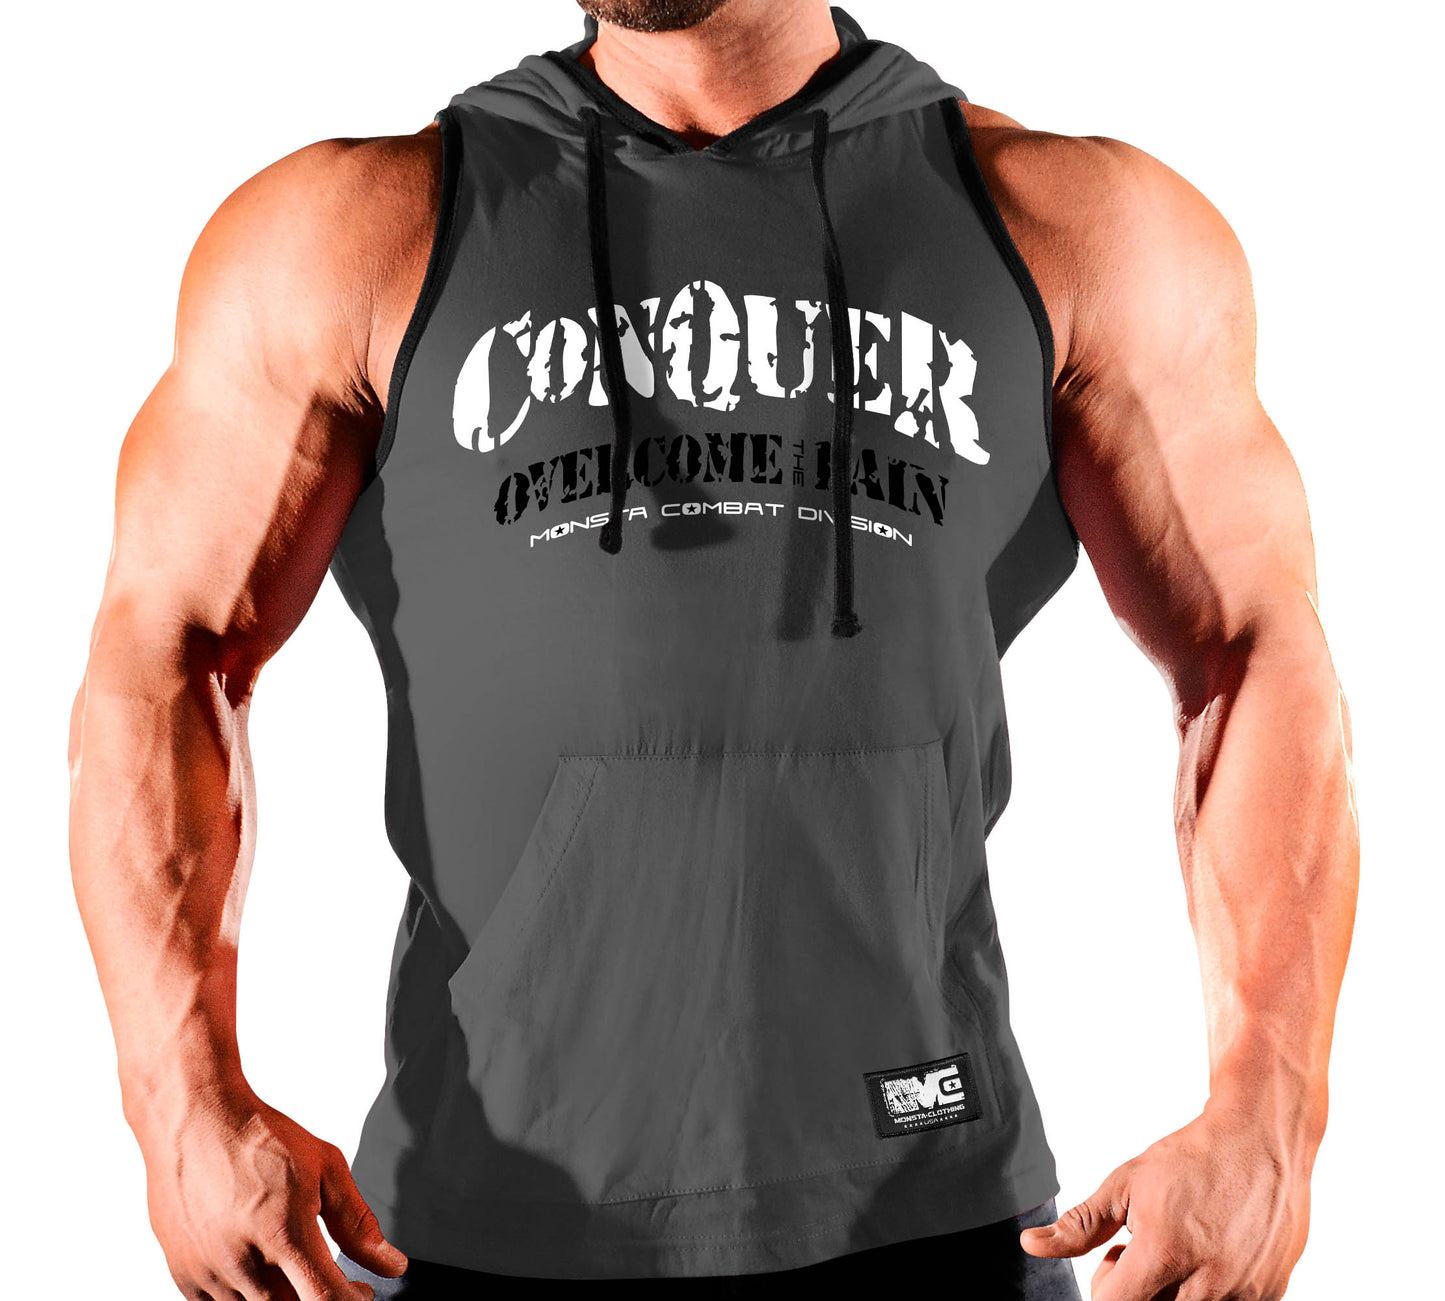 CONQUER-Overcome the Pain-137: WT-BK